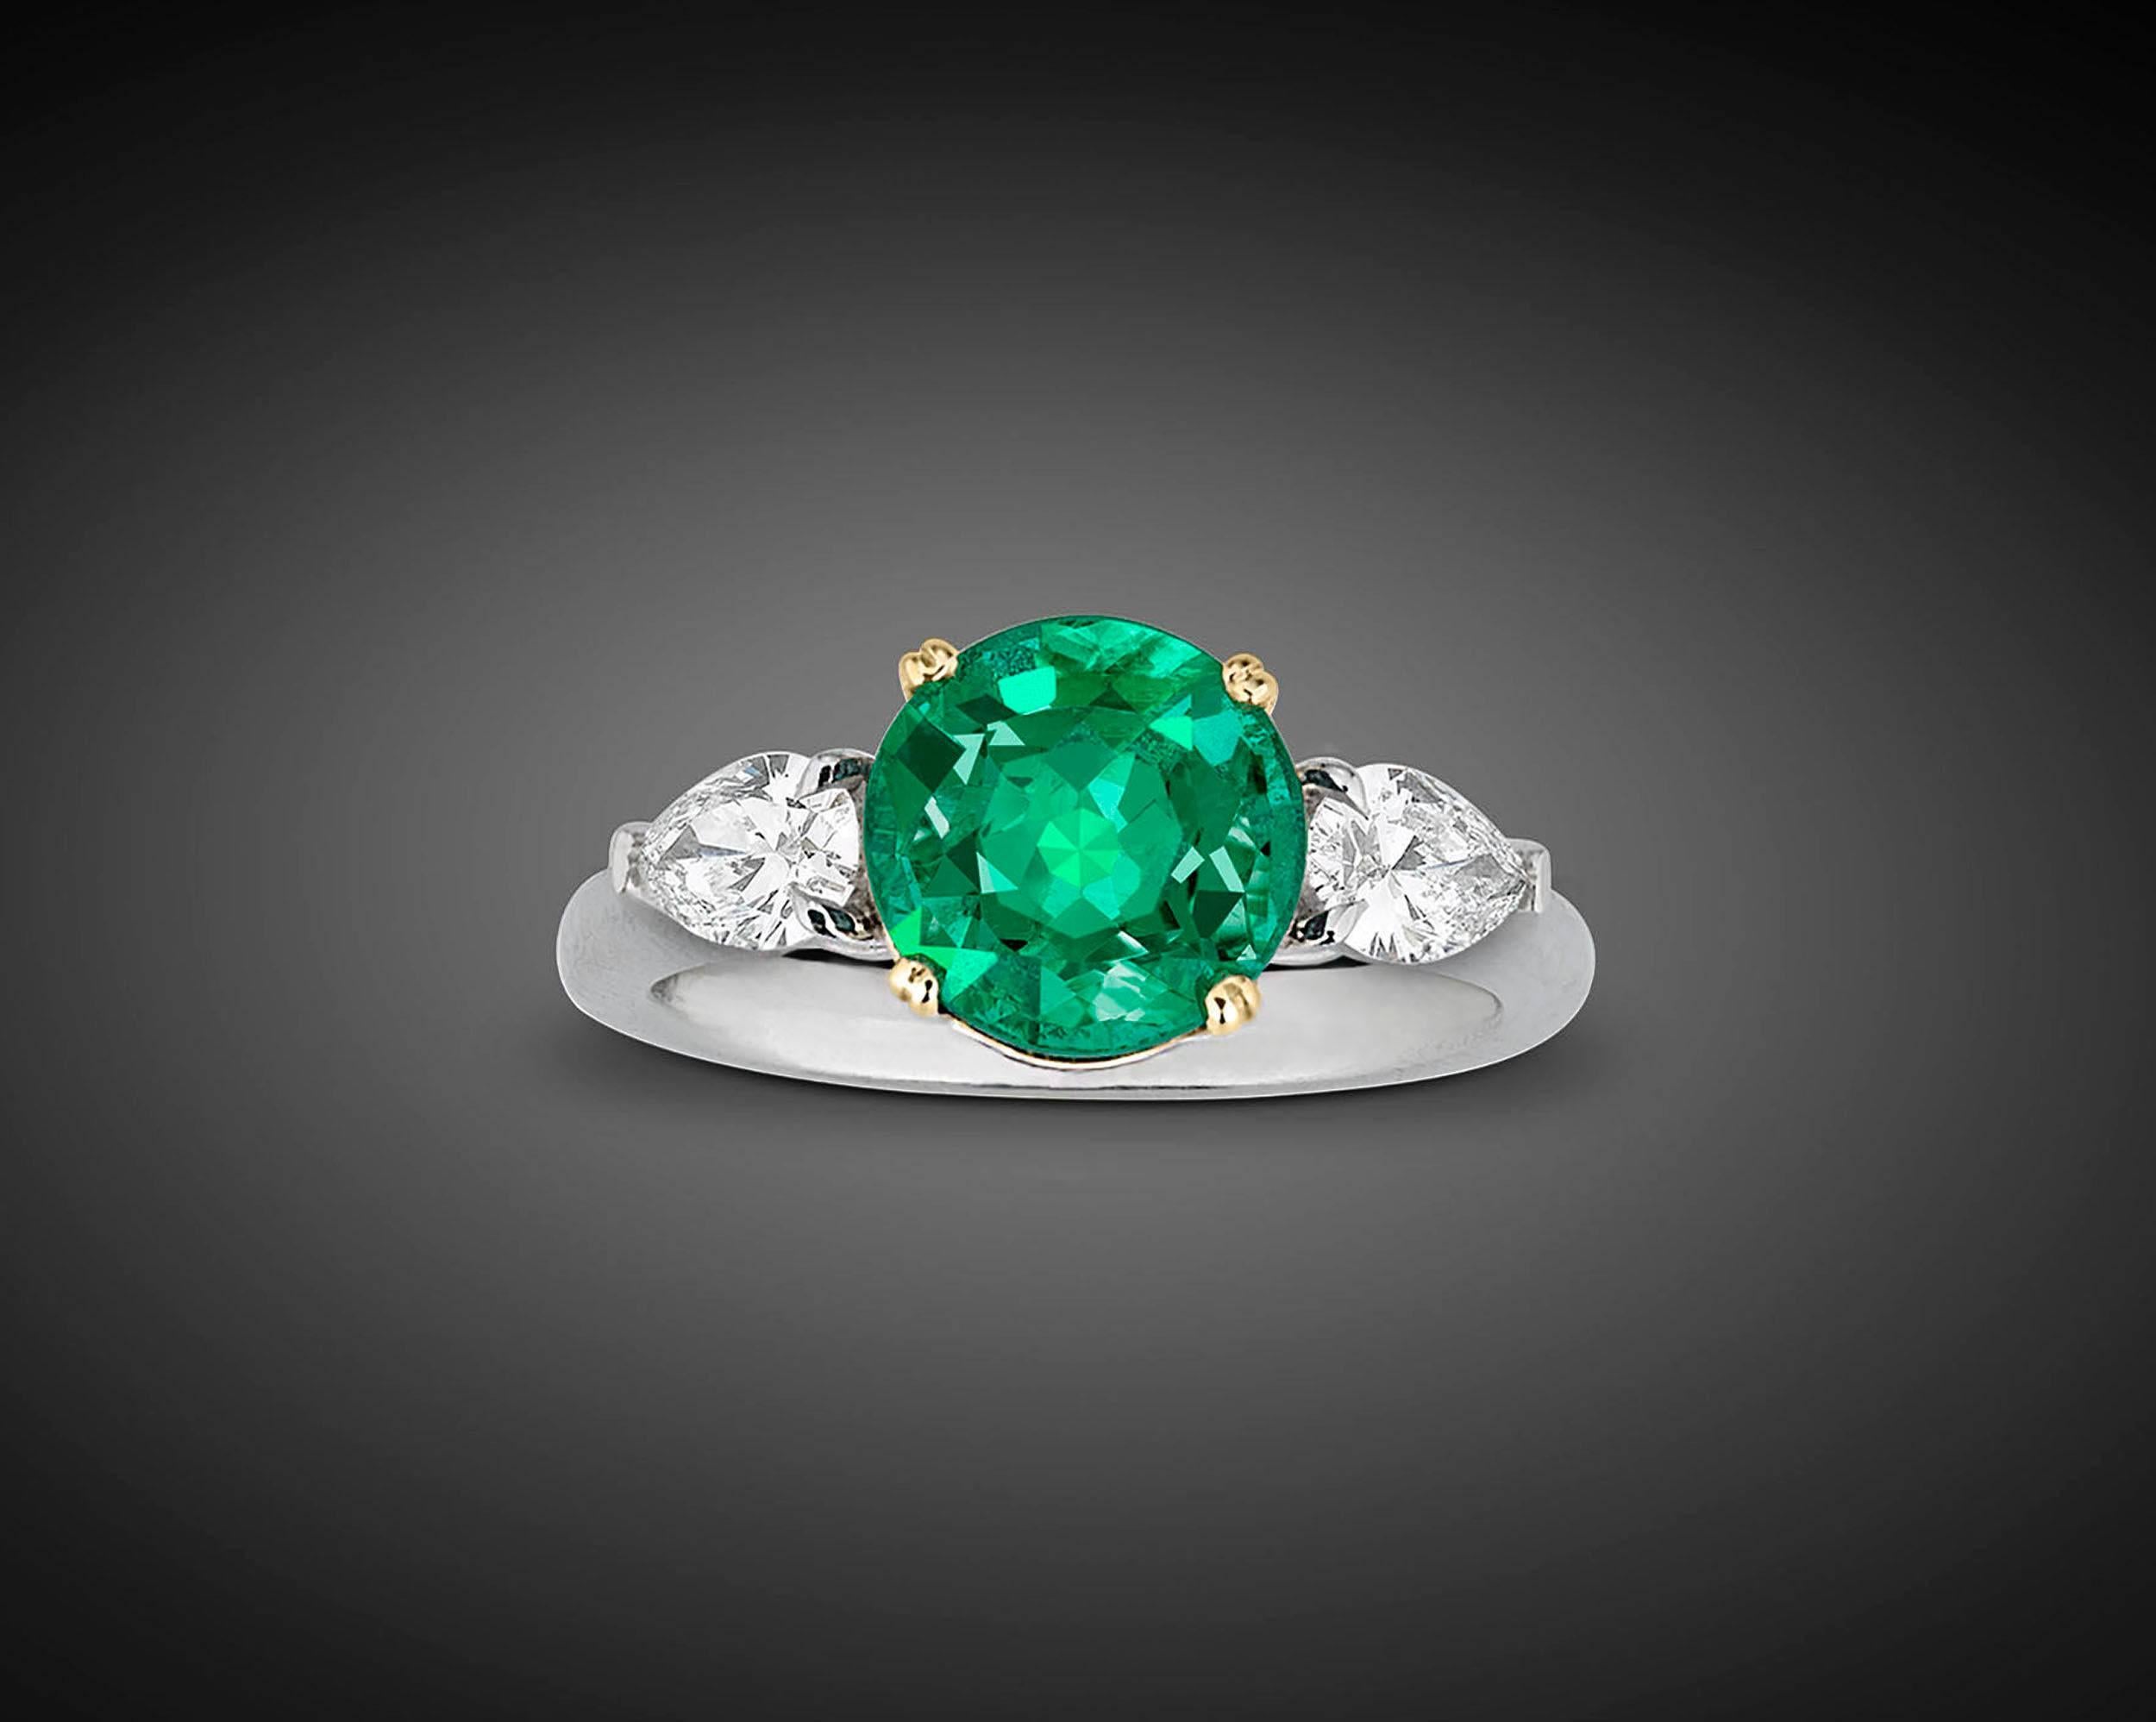 A stunning 2.58-carat emerald takes center stage in this exquisite ring. The luminous round brilliant-cut gem is perfectly complemented by two pear-cut white diamonds weighing 0.61 total carats, which support it on either side.  Displaying vibrant